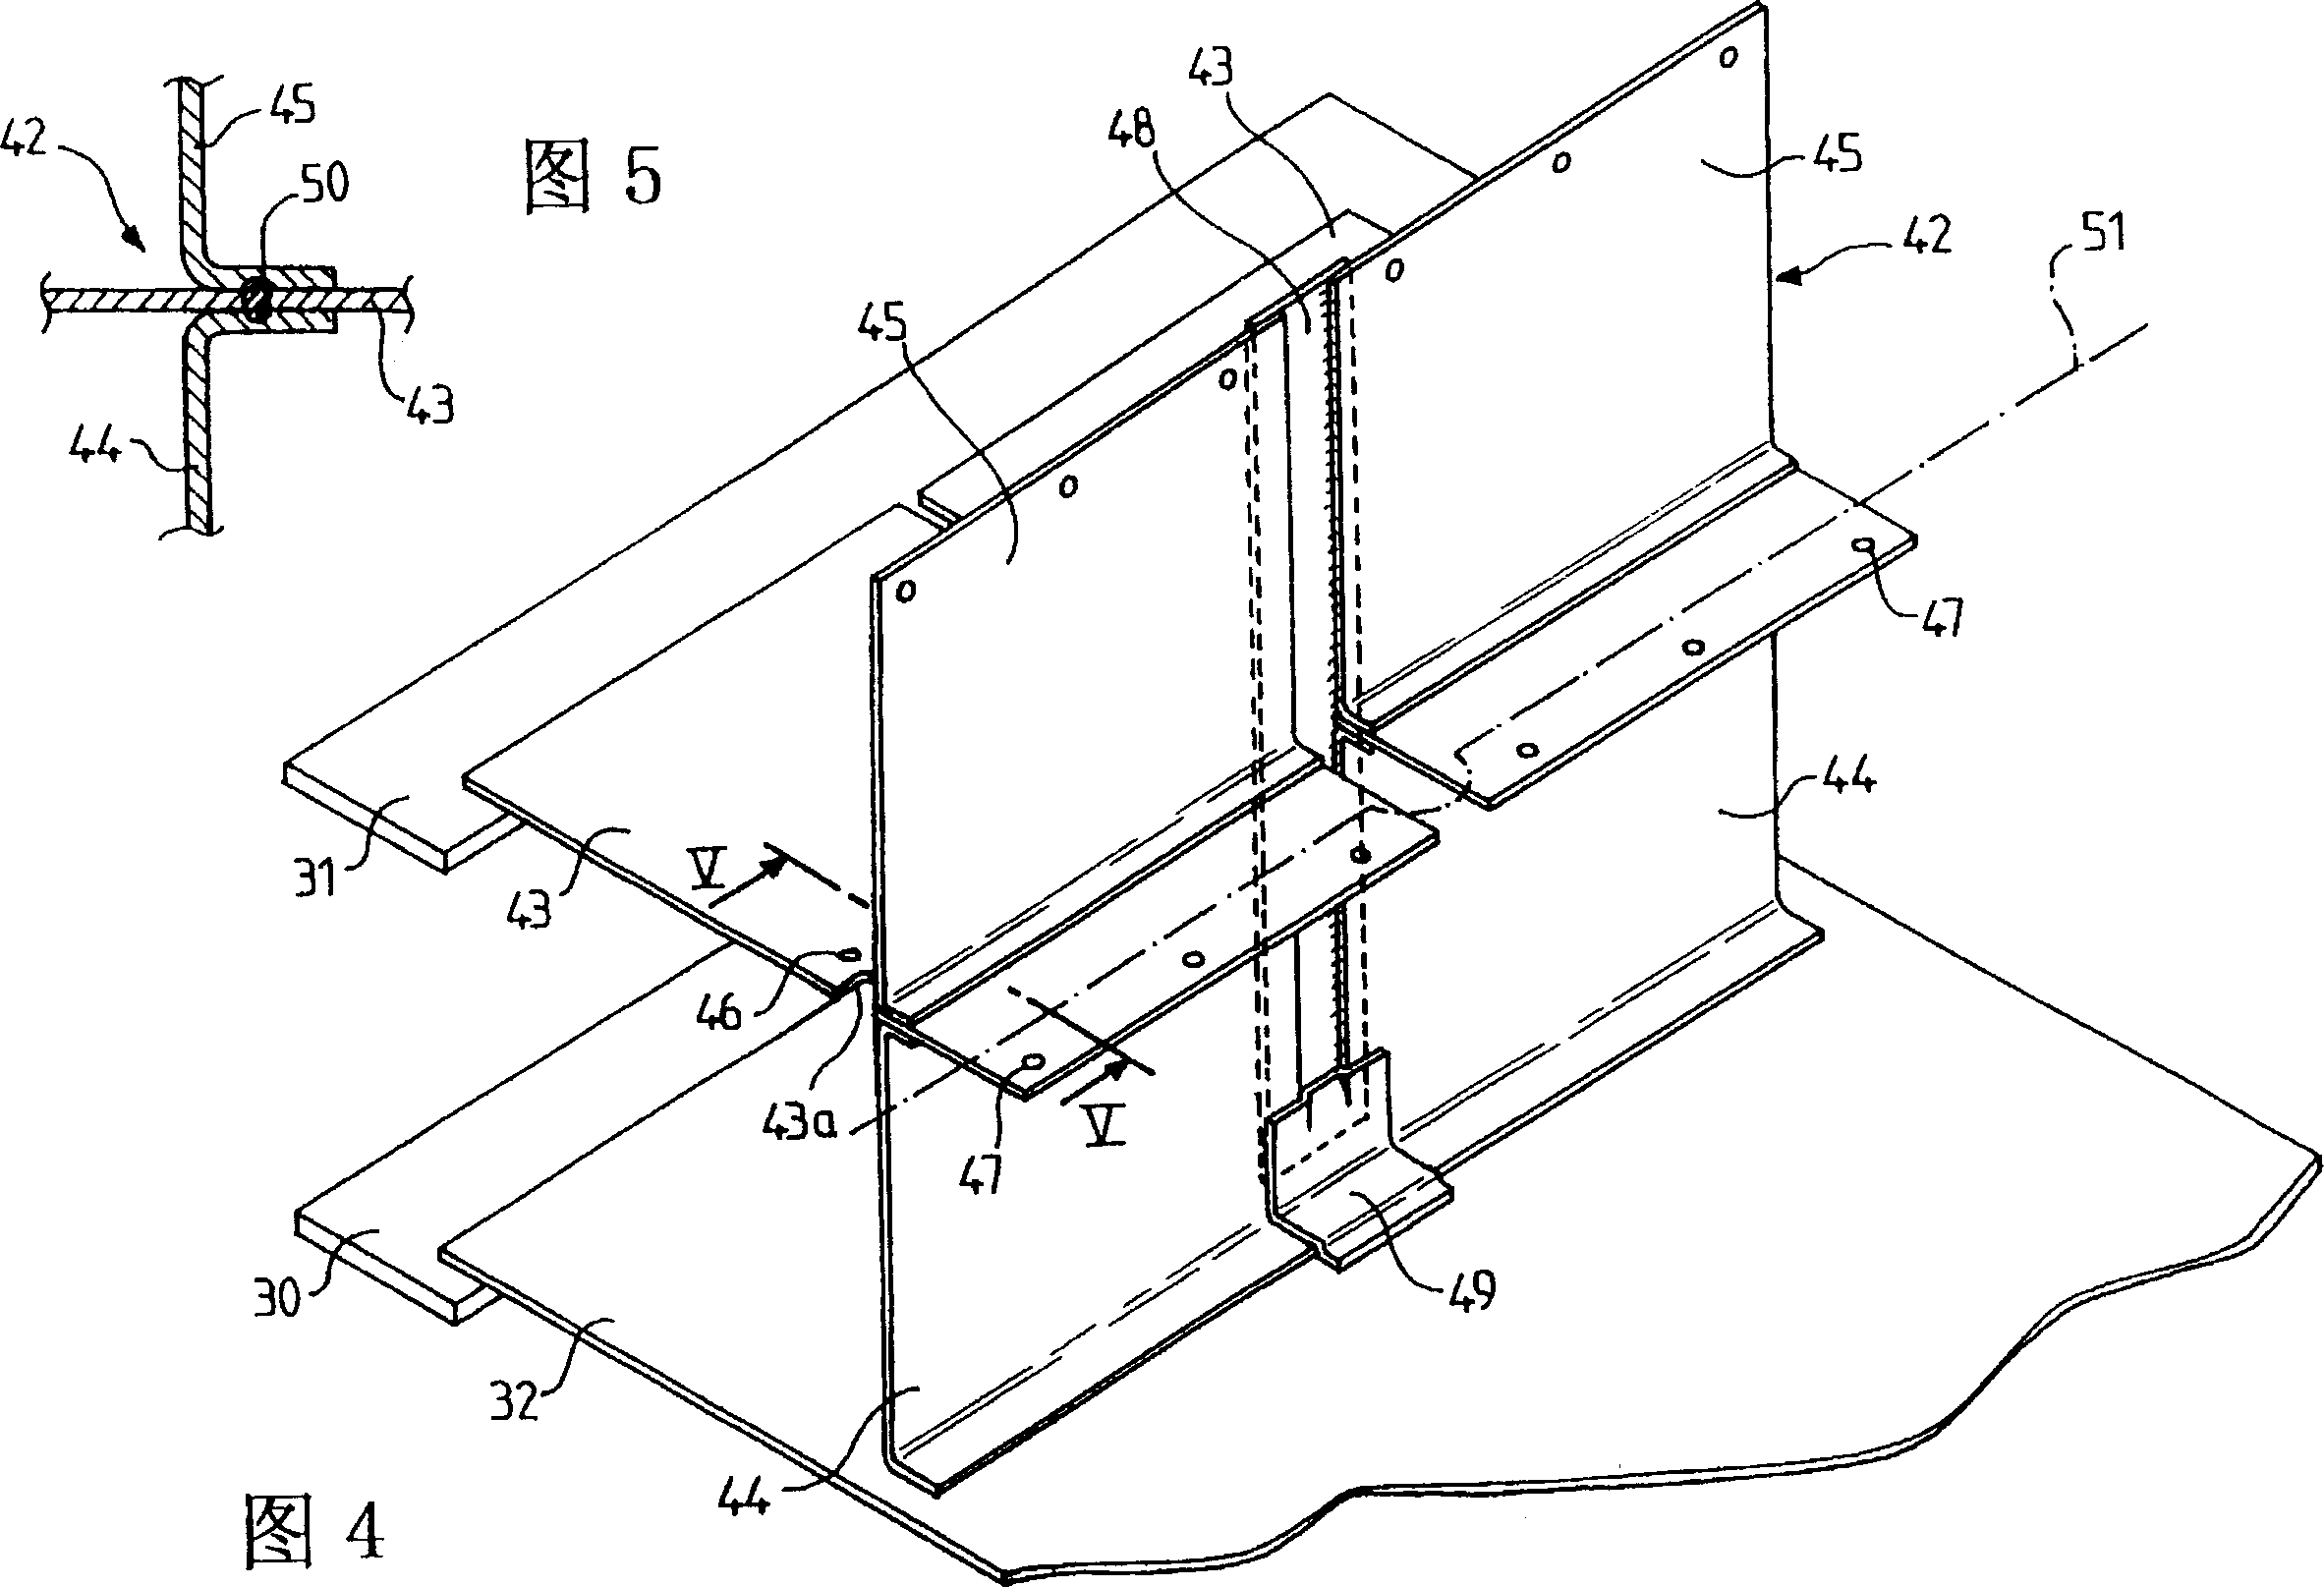 Water-proof heat-insulation cabin with simple corner structure in ship-supporting structure